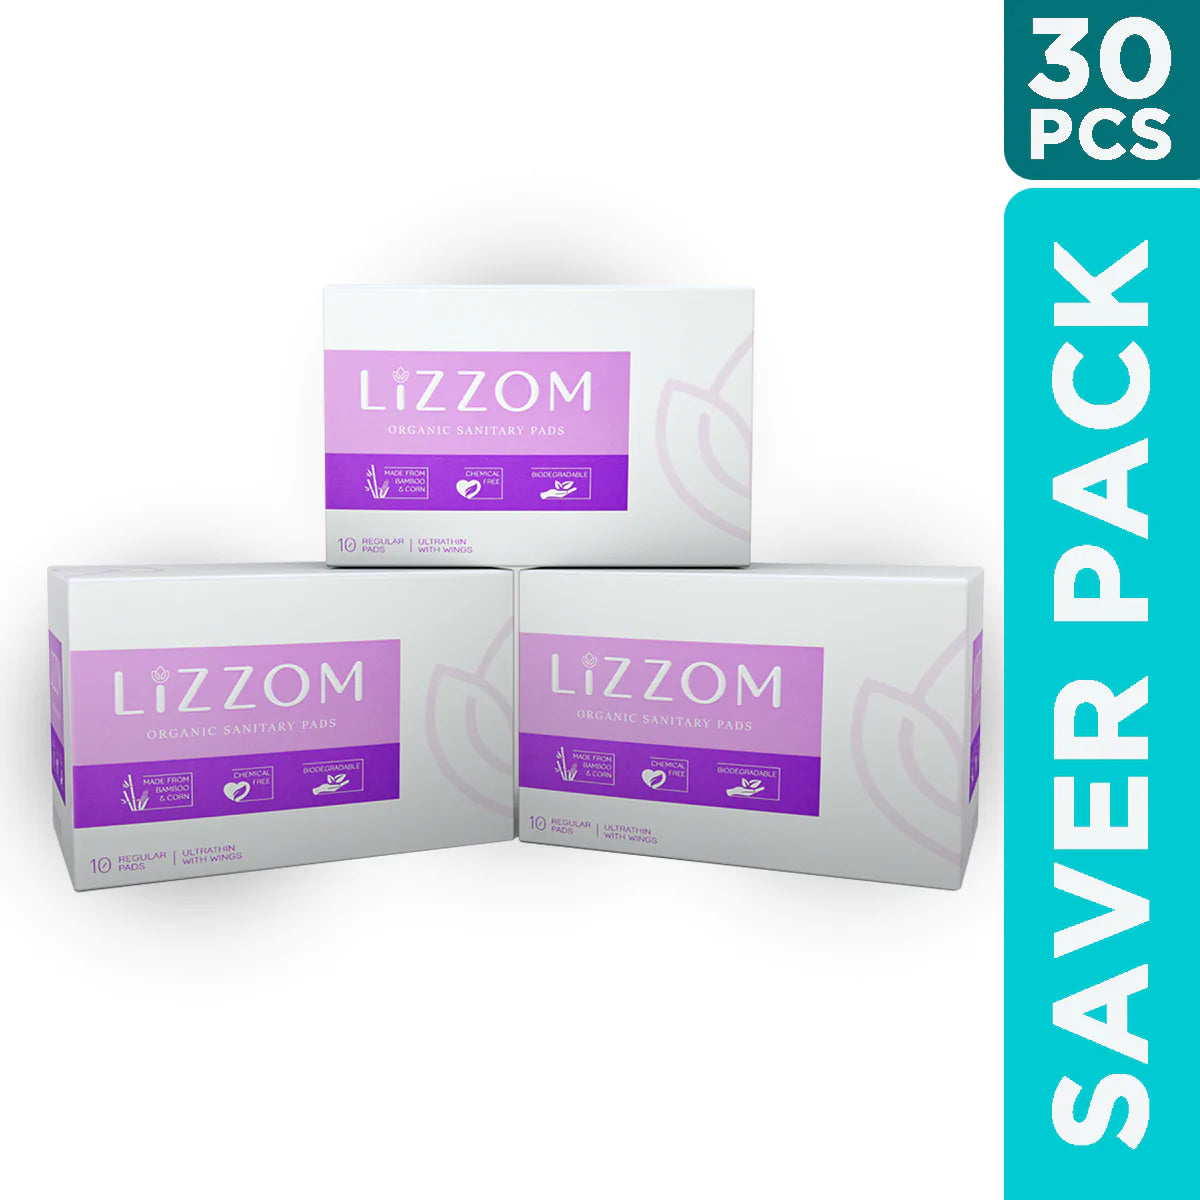 LiZZOM Ultra Thin Large Pads With Wings (30 pc) - Pack Of 3